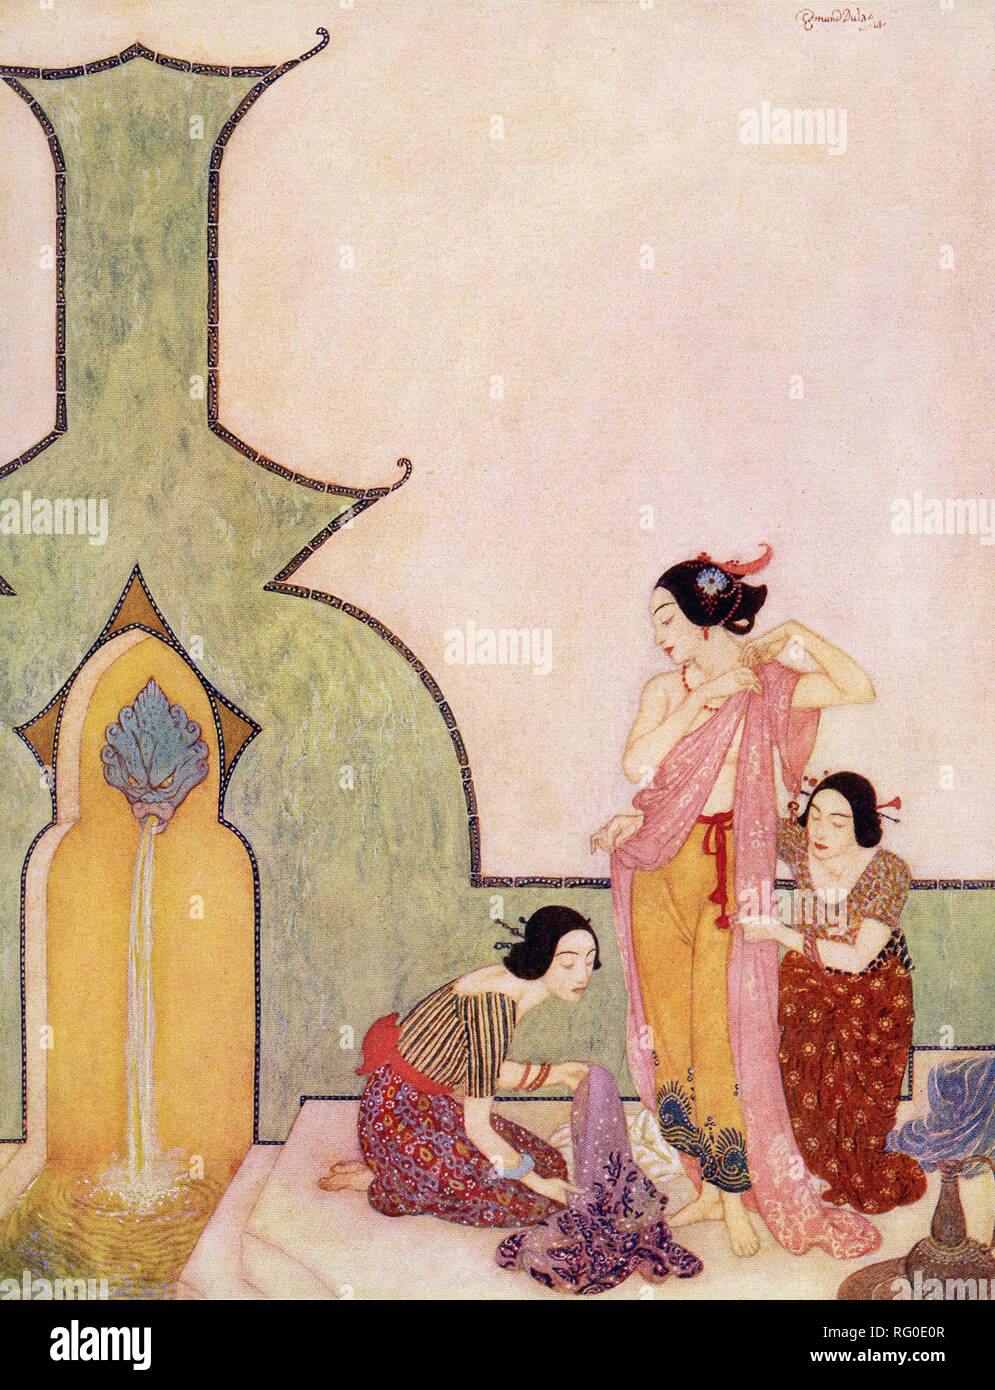 This illustration is taken from the book 'Sinbad the Sailor' that was published around 1914.  It shows Lady Bedr-el-Budr at her bath. The illustrator was Edmund Dulac and the story is from the Arabian Nights. Aladdin fell in love with Lady Bedr-el-Buhr when he saw her. Here the Lady is shown at her bath. Stock Photo